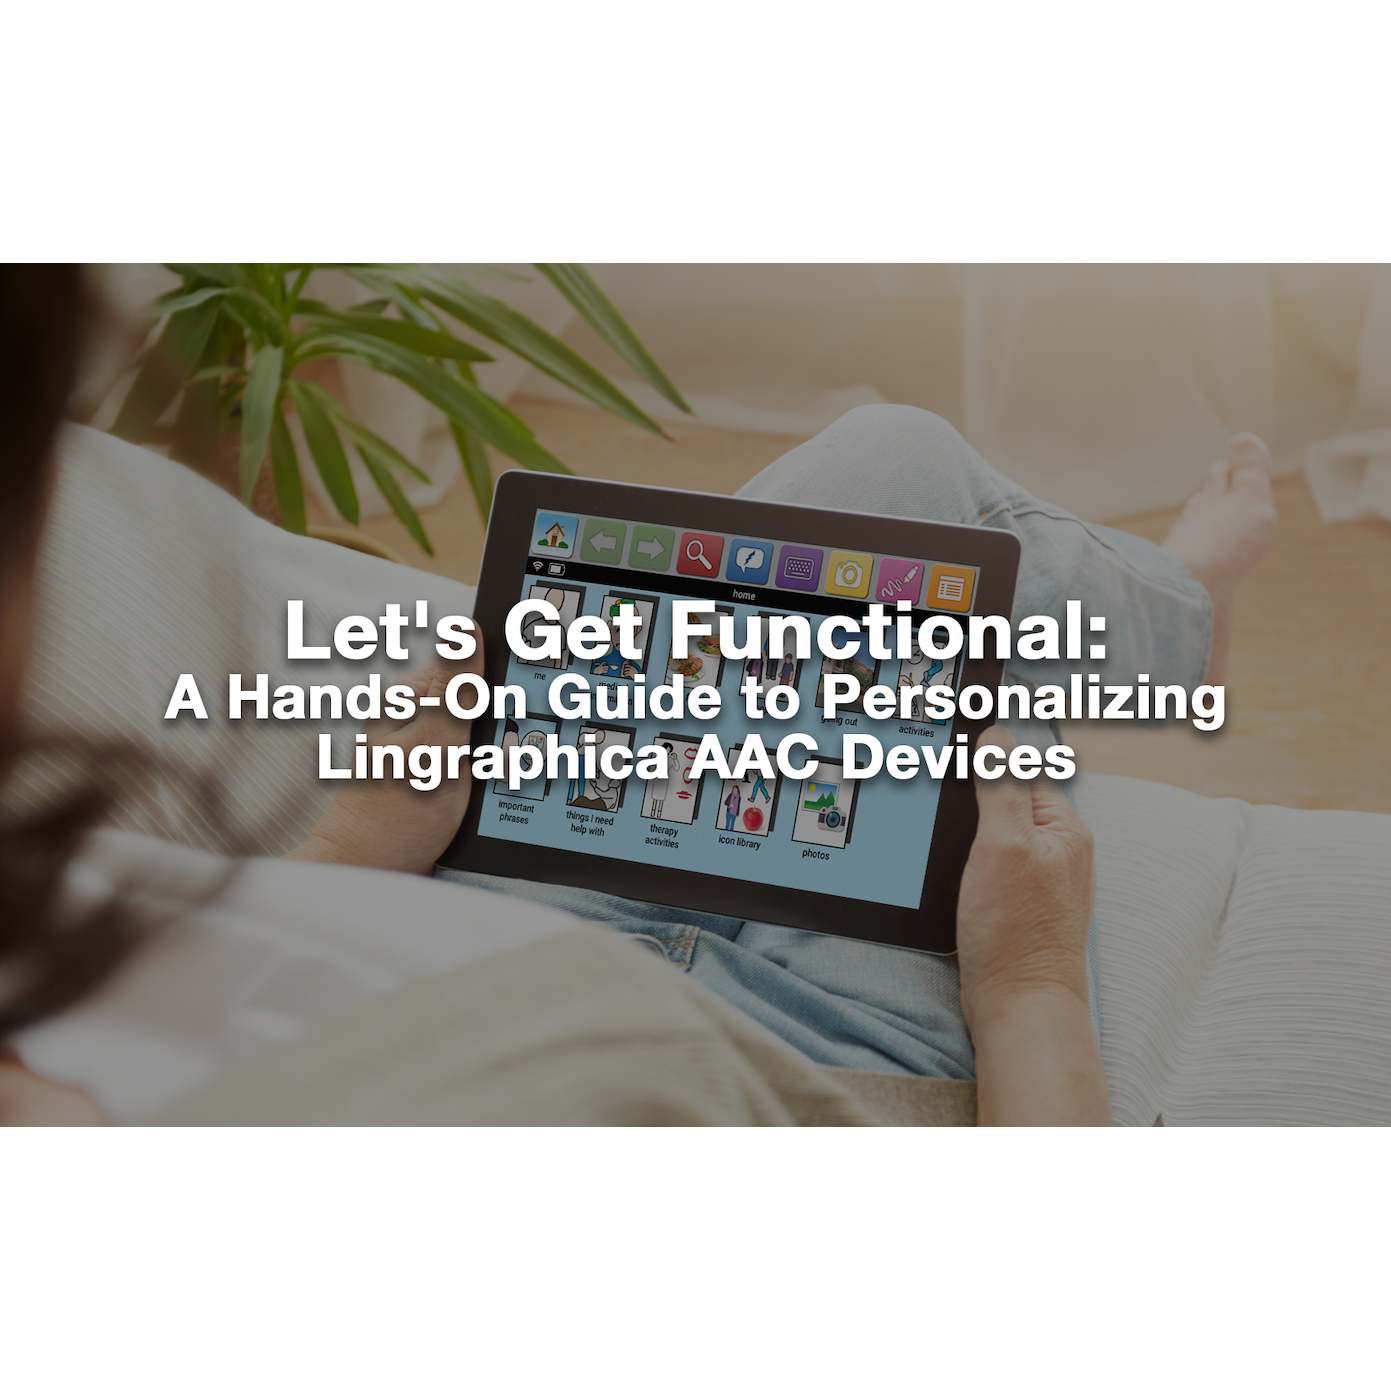 Let's Get Functional: A Hands-On Guide to Personalizing Lingraphica AAC Devices: 0.2 CEU Self-Study